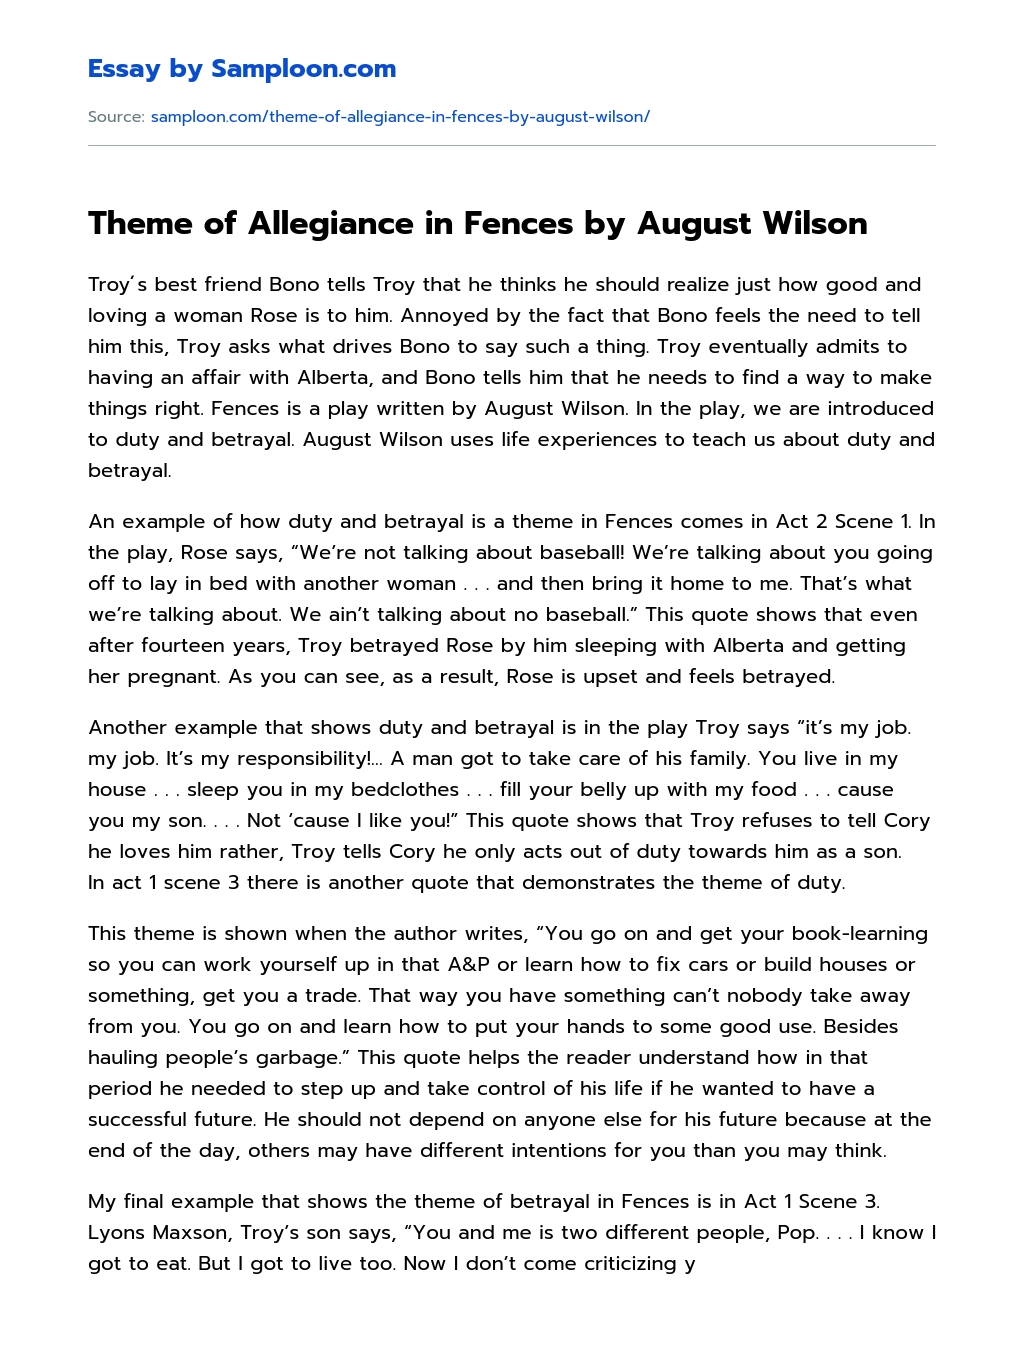 Theme of Allegiance in Fences by August Wilson essay